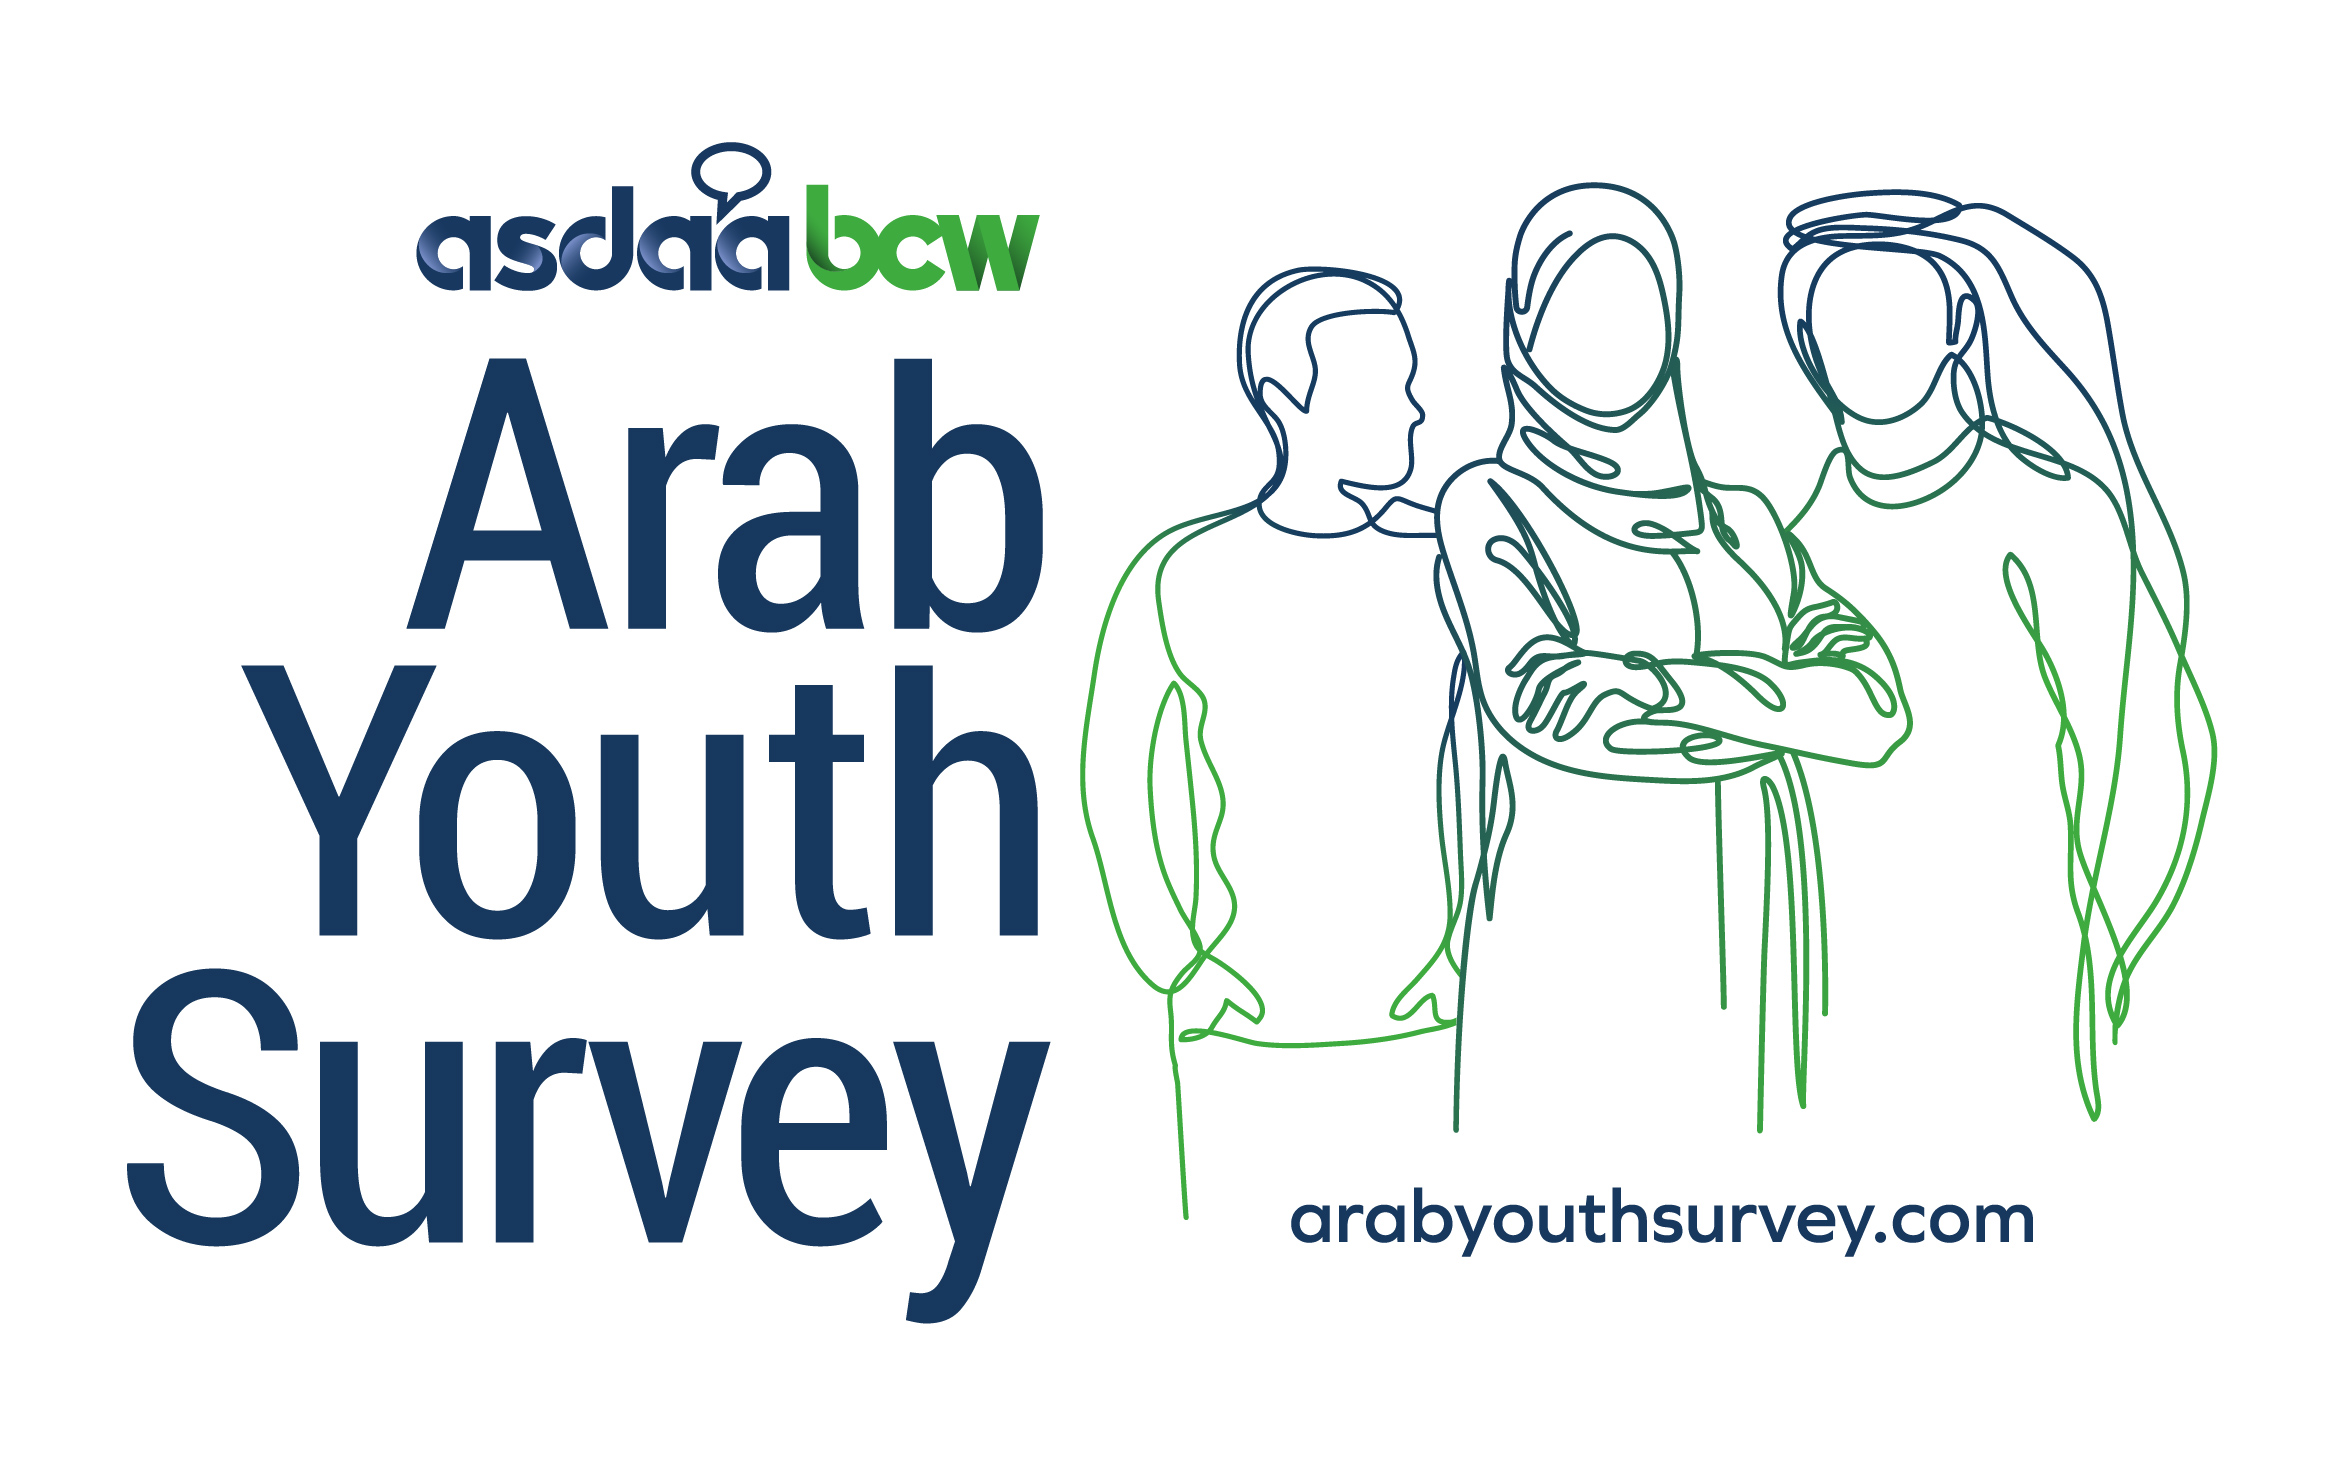 ASDA’A BCW Youth Survey: Saudi Youth Looks Ahead to Stronger Relations with the U.S